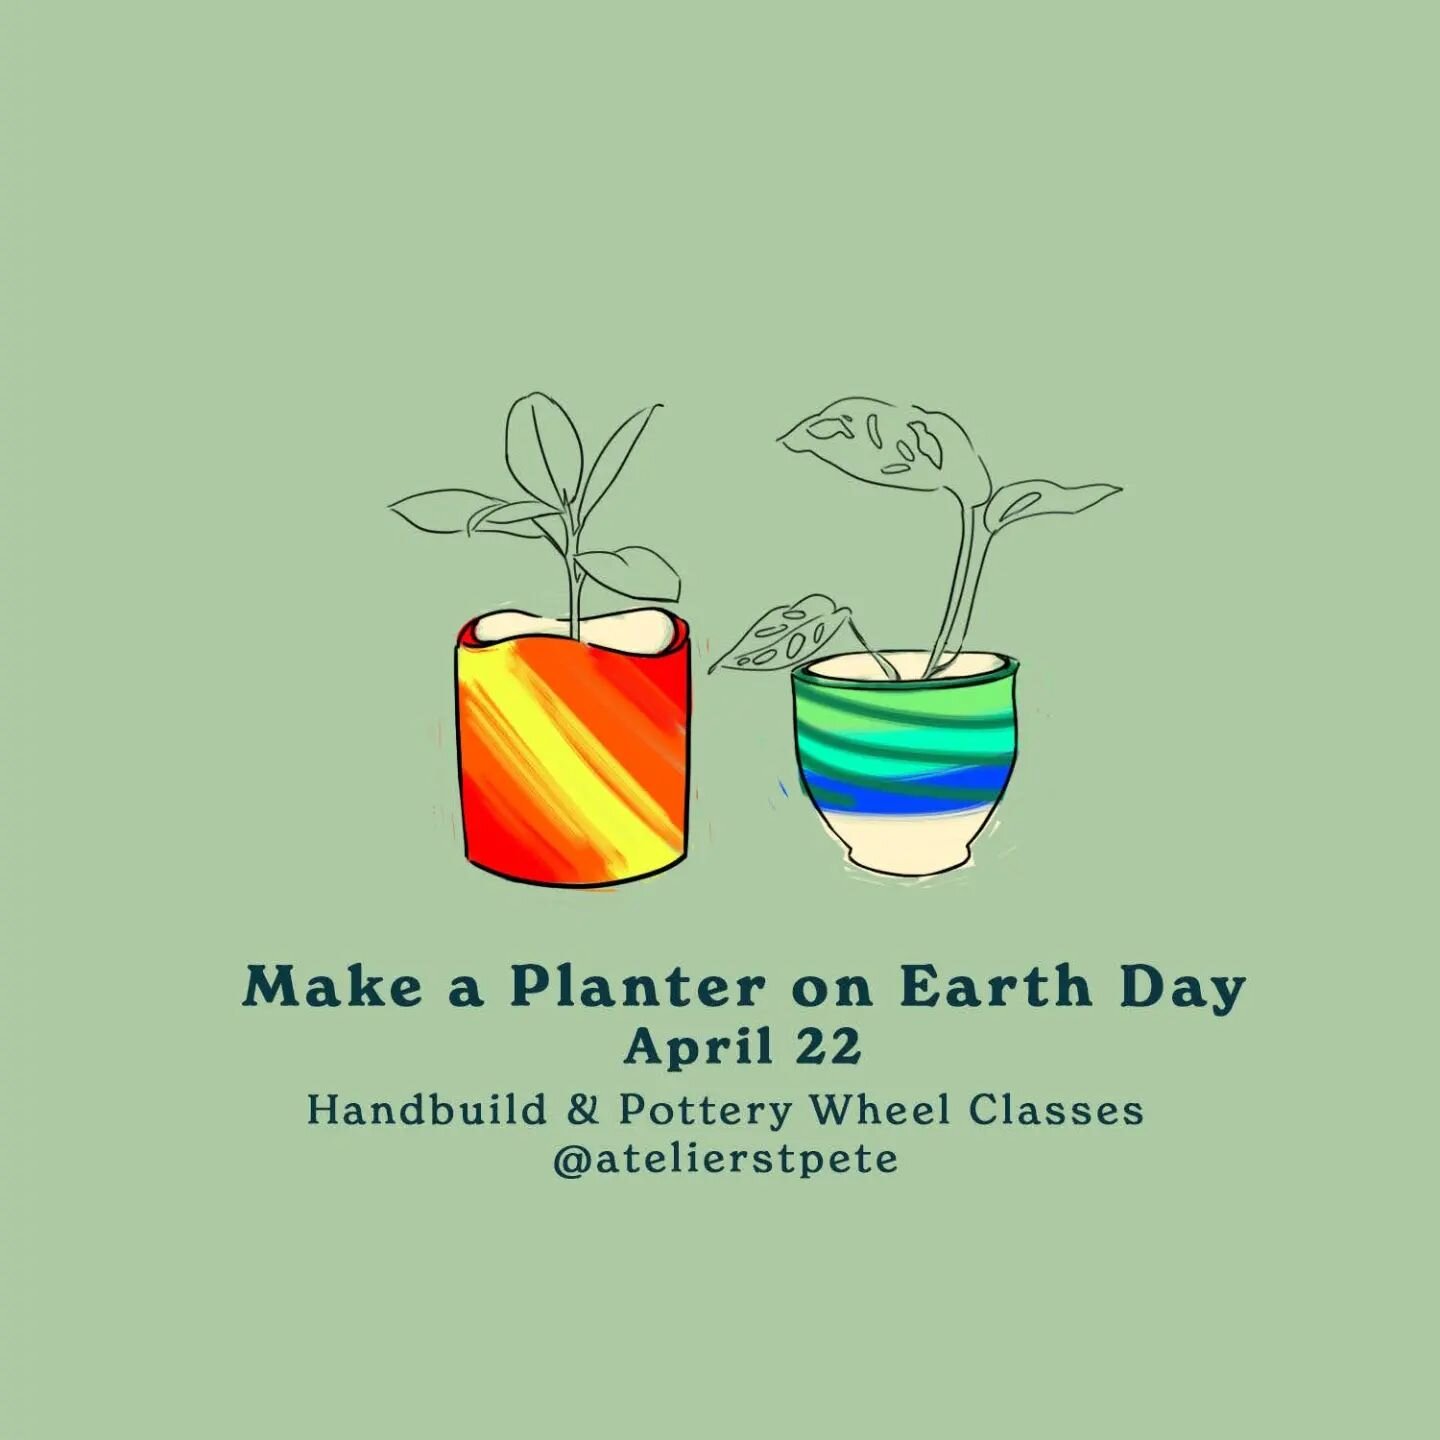 Join us on Saturday, April 22nd for Earth Day and make a planter of your own! Choose either the handbuilding class or the pottery wheel! Sign up online or give us a call.